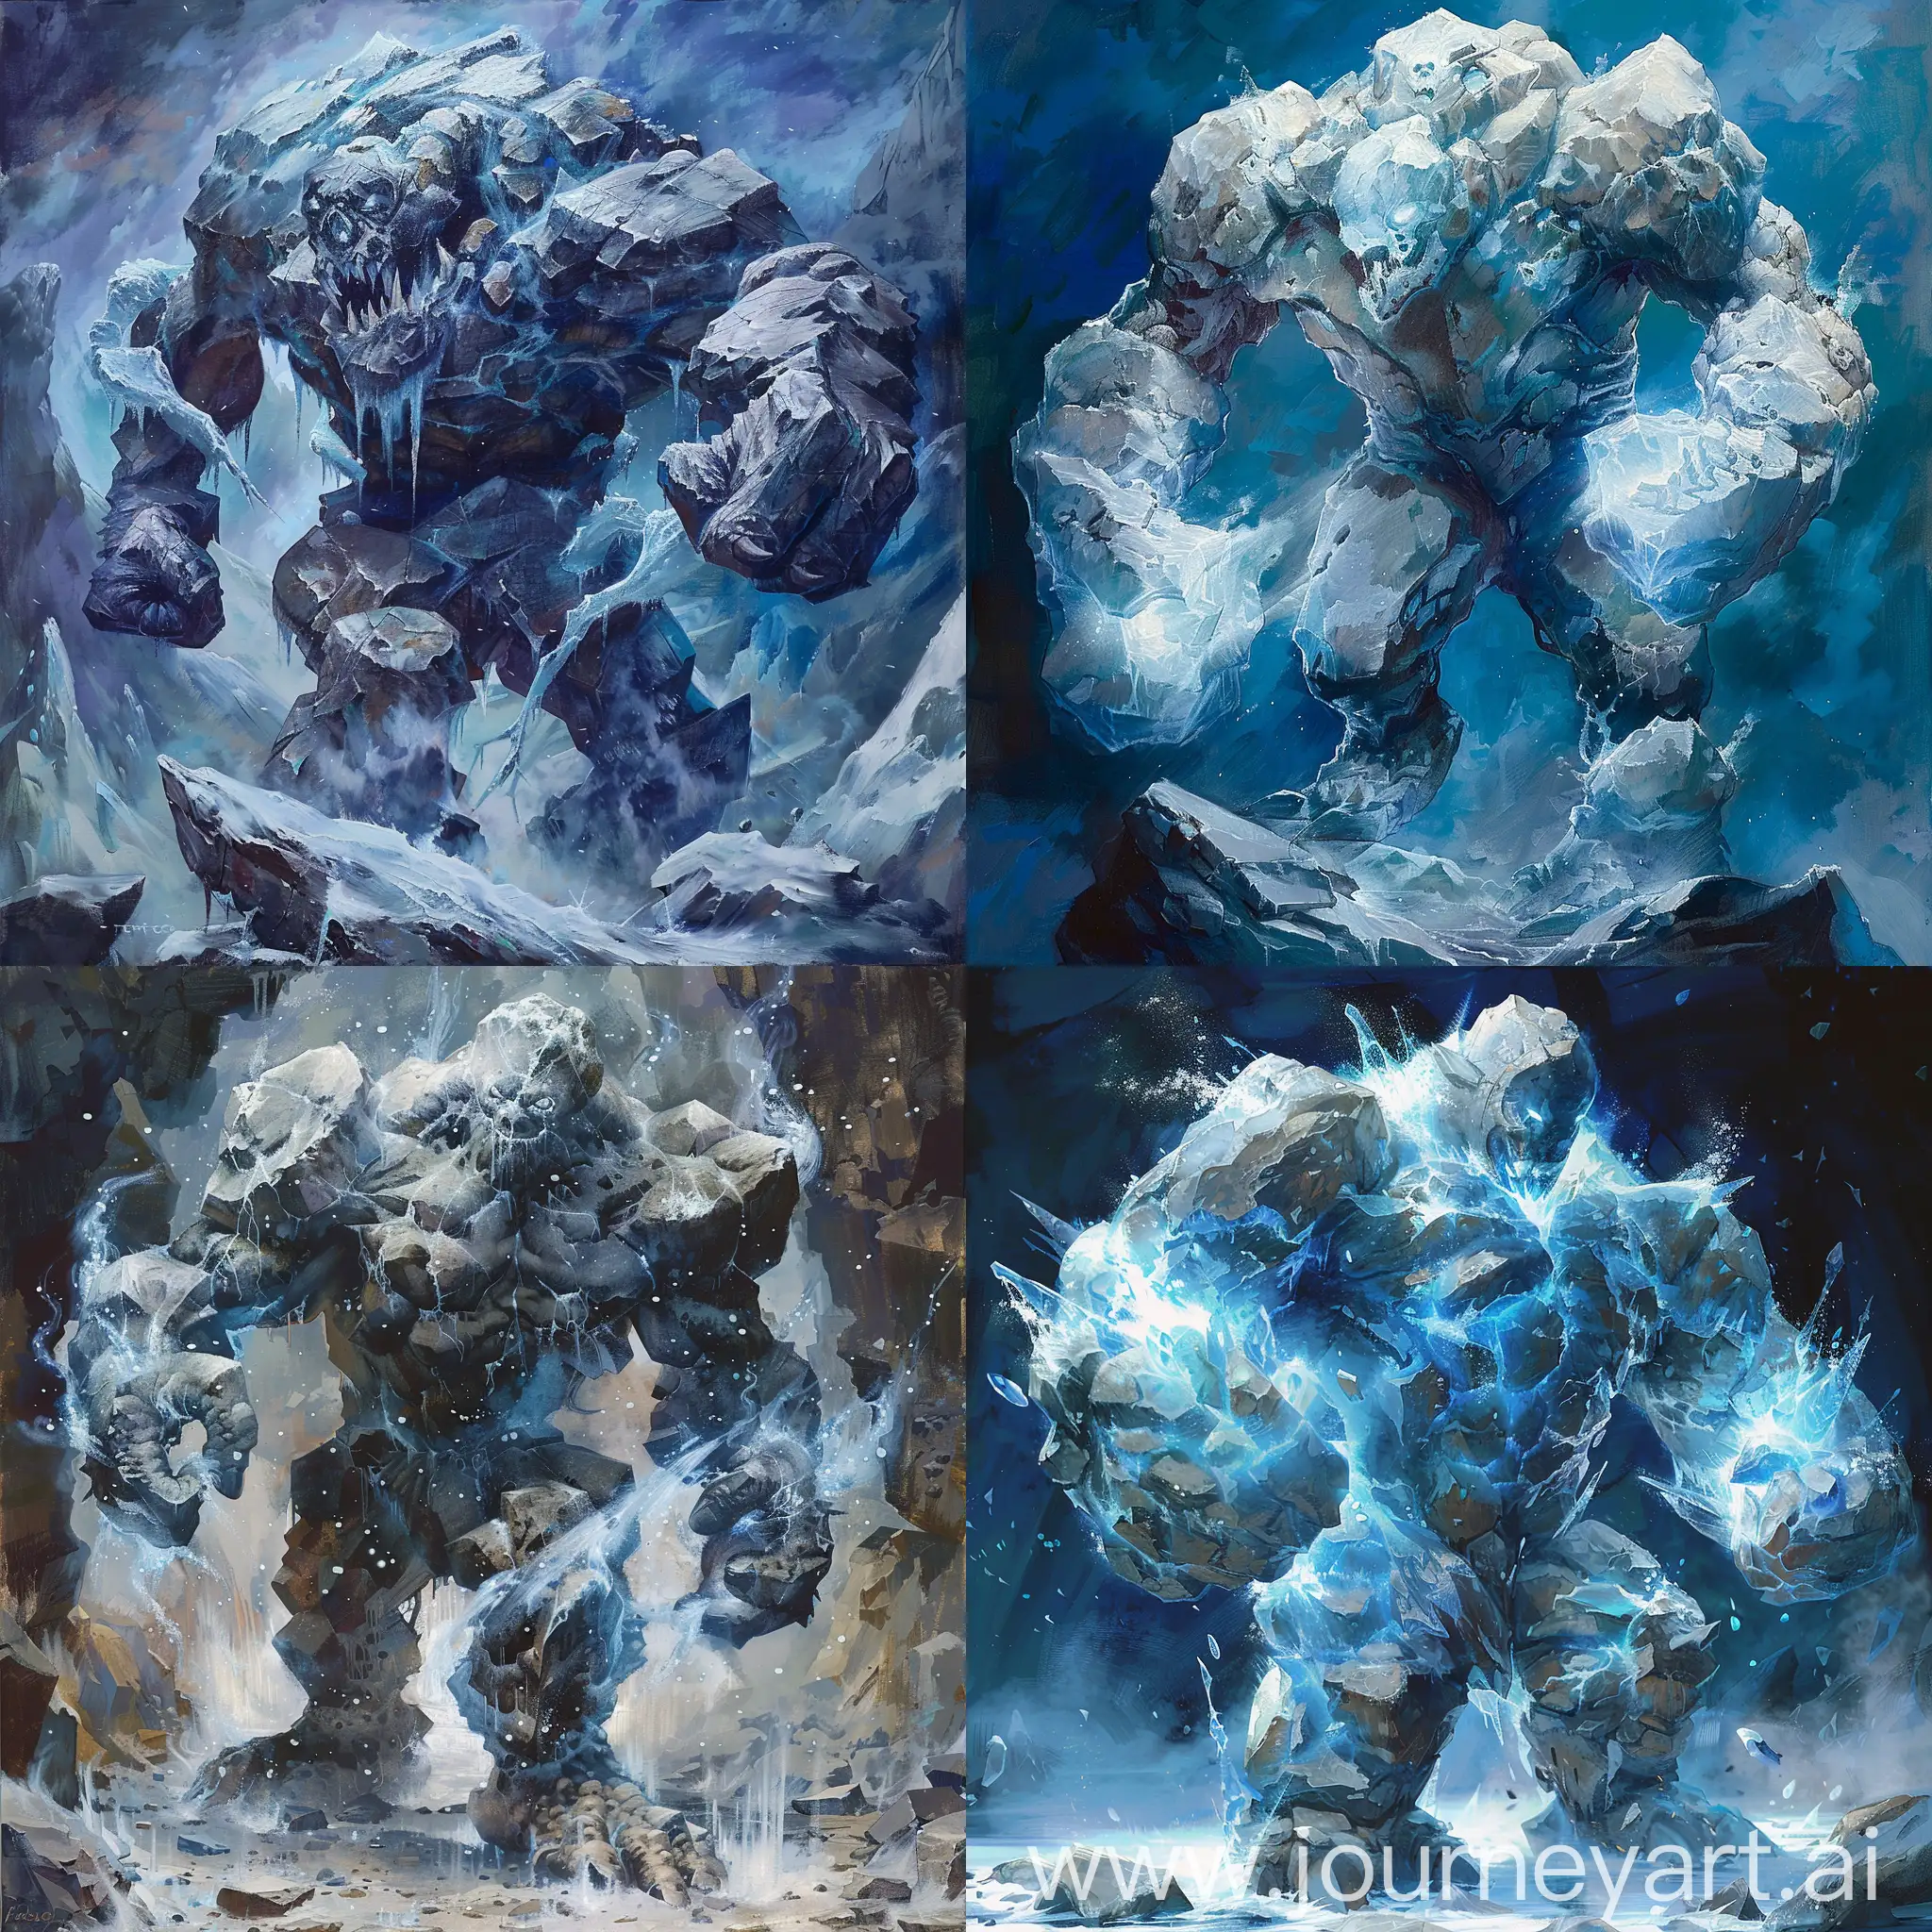 Magical golem made of stone and ice magic.
In the art style of Terese Nielsen oil painting.